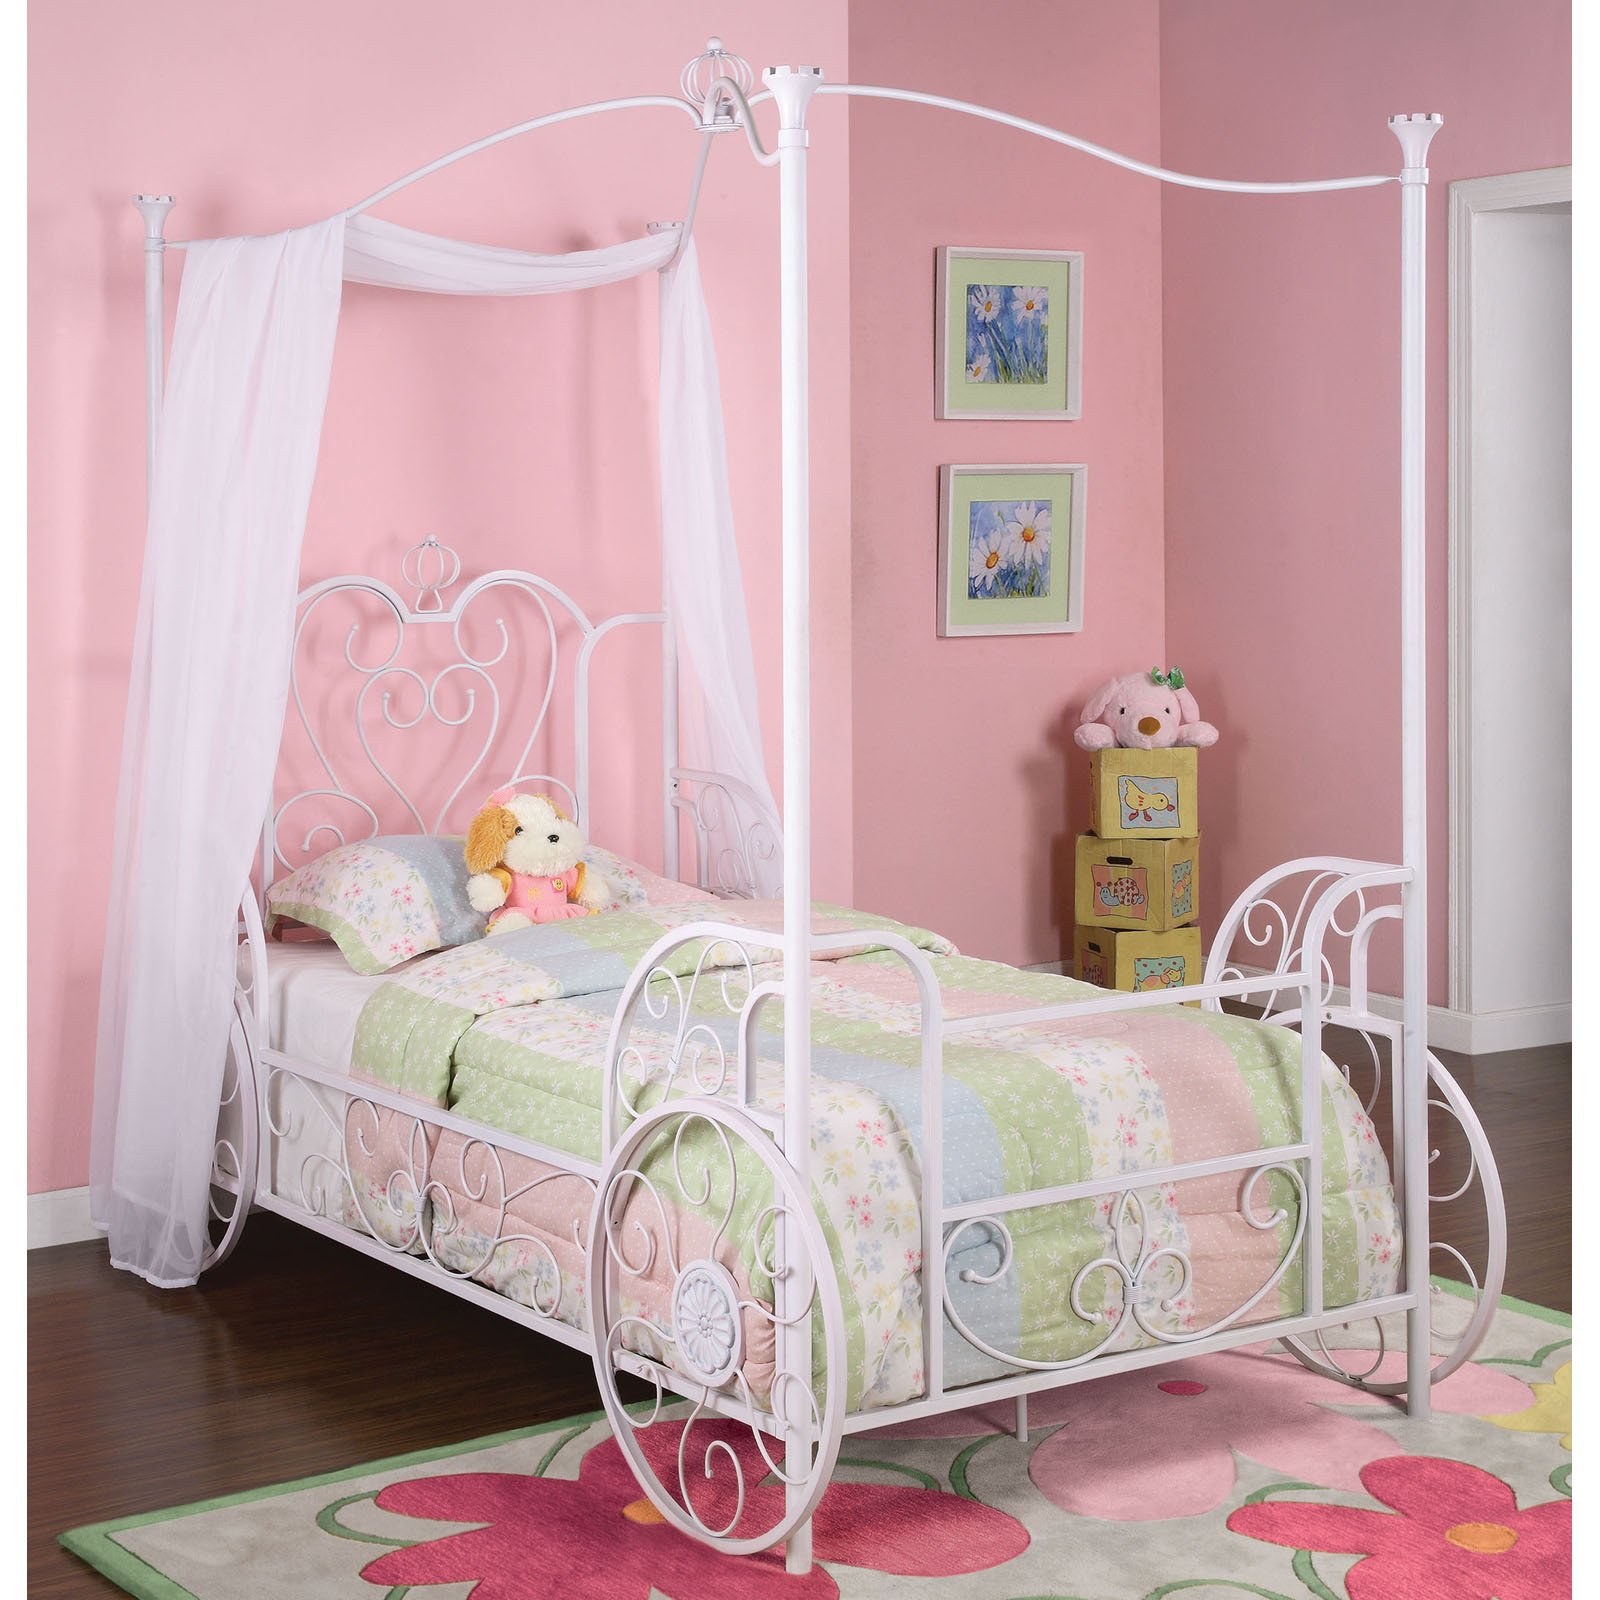 Princess Canopy Beds for Girls